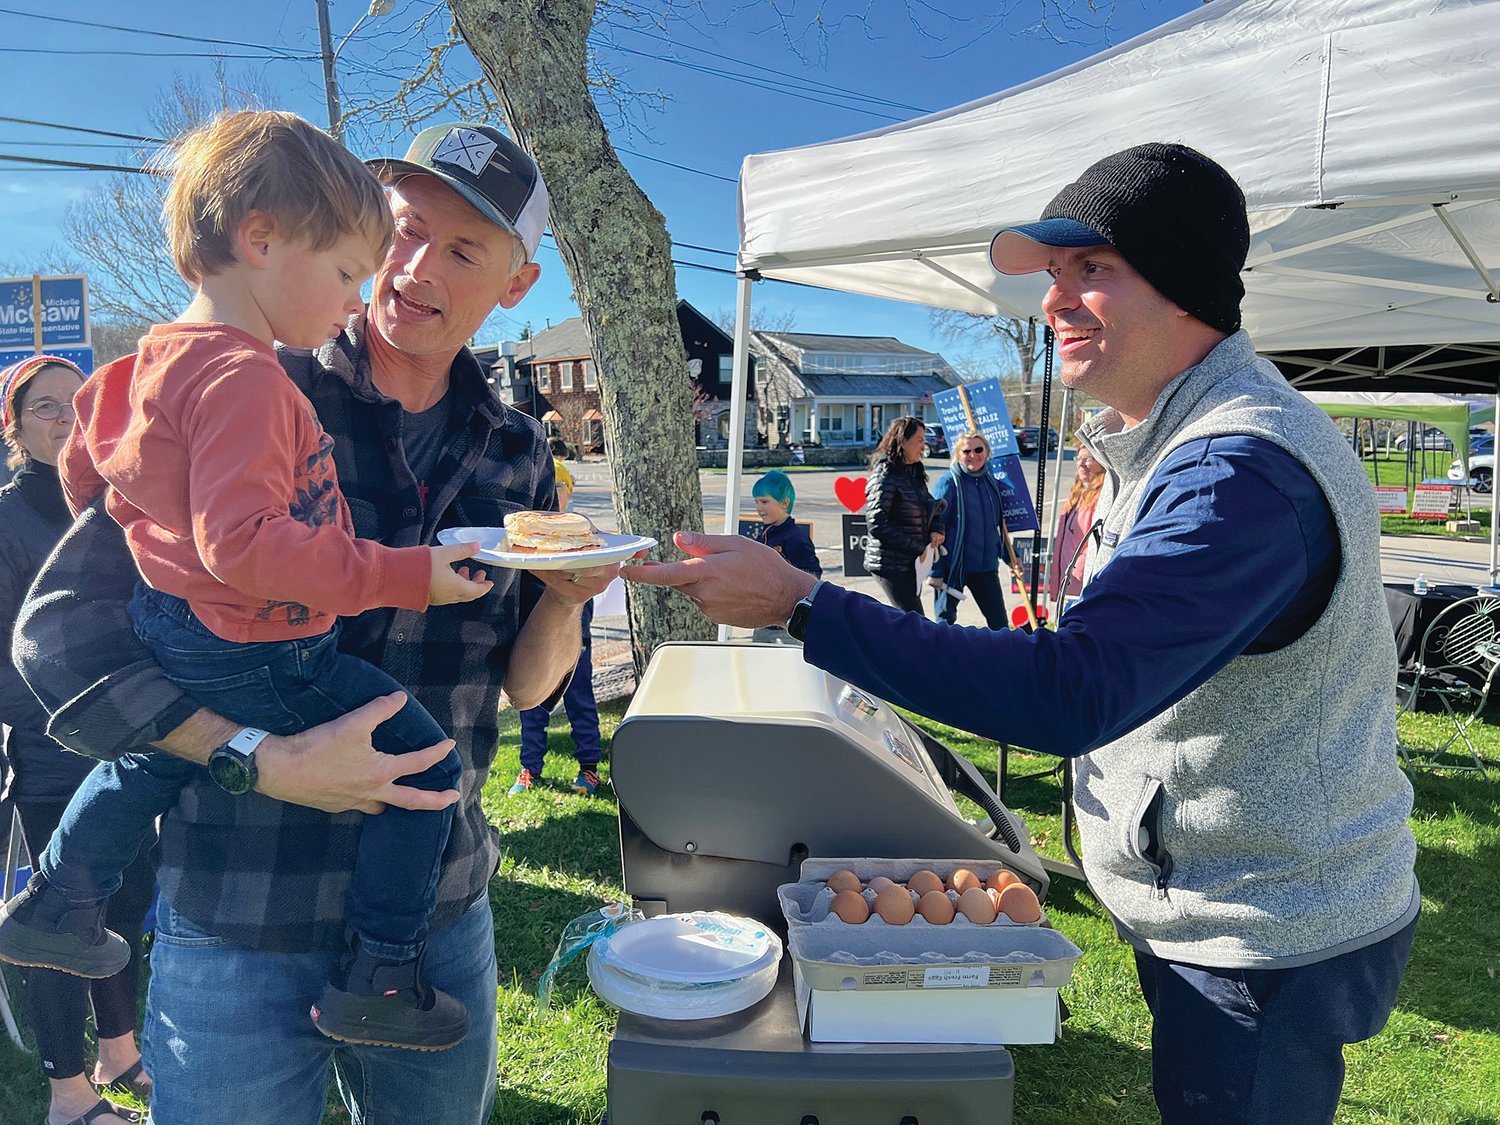 Incumbent school committee member and Democratic Town Committee Chairman Travis Auty serves voters sandwiches from his grill near the Wilbur McMahon School Tuesday morning.